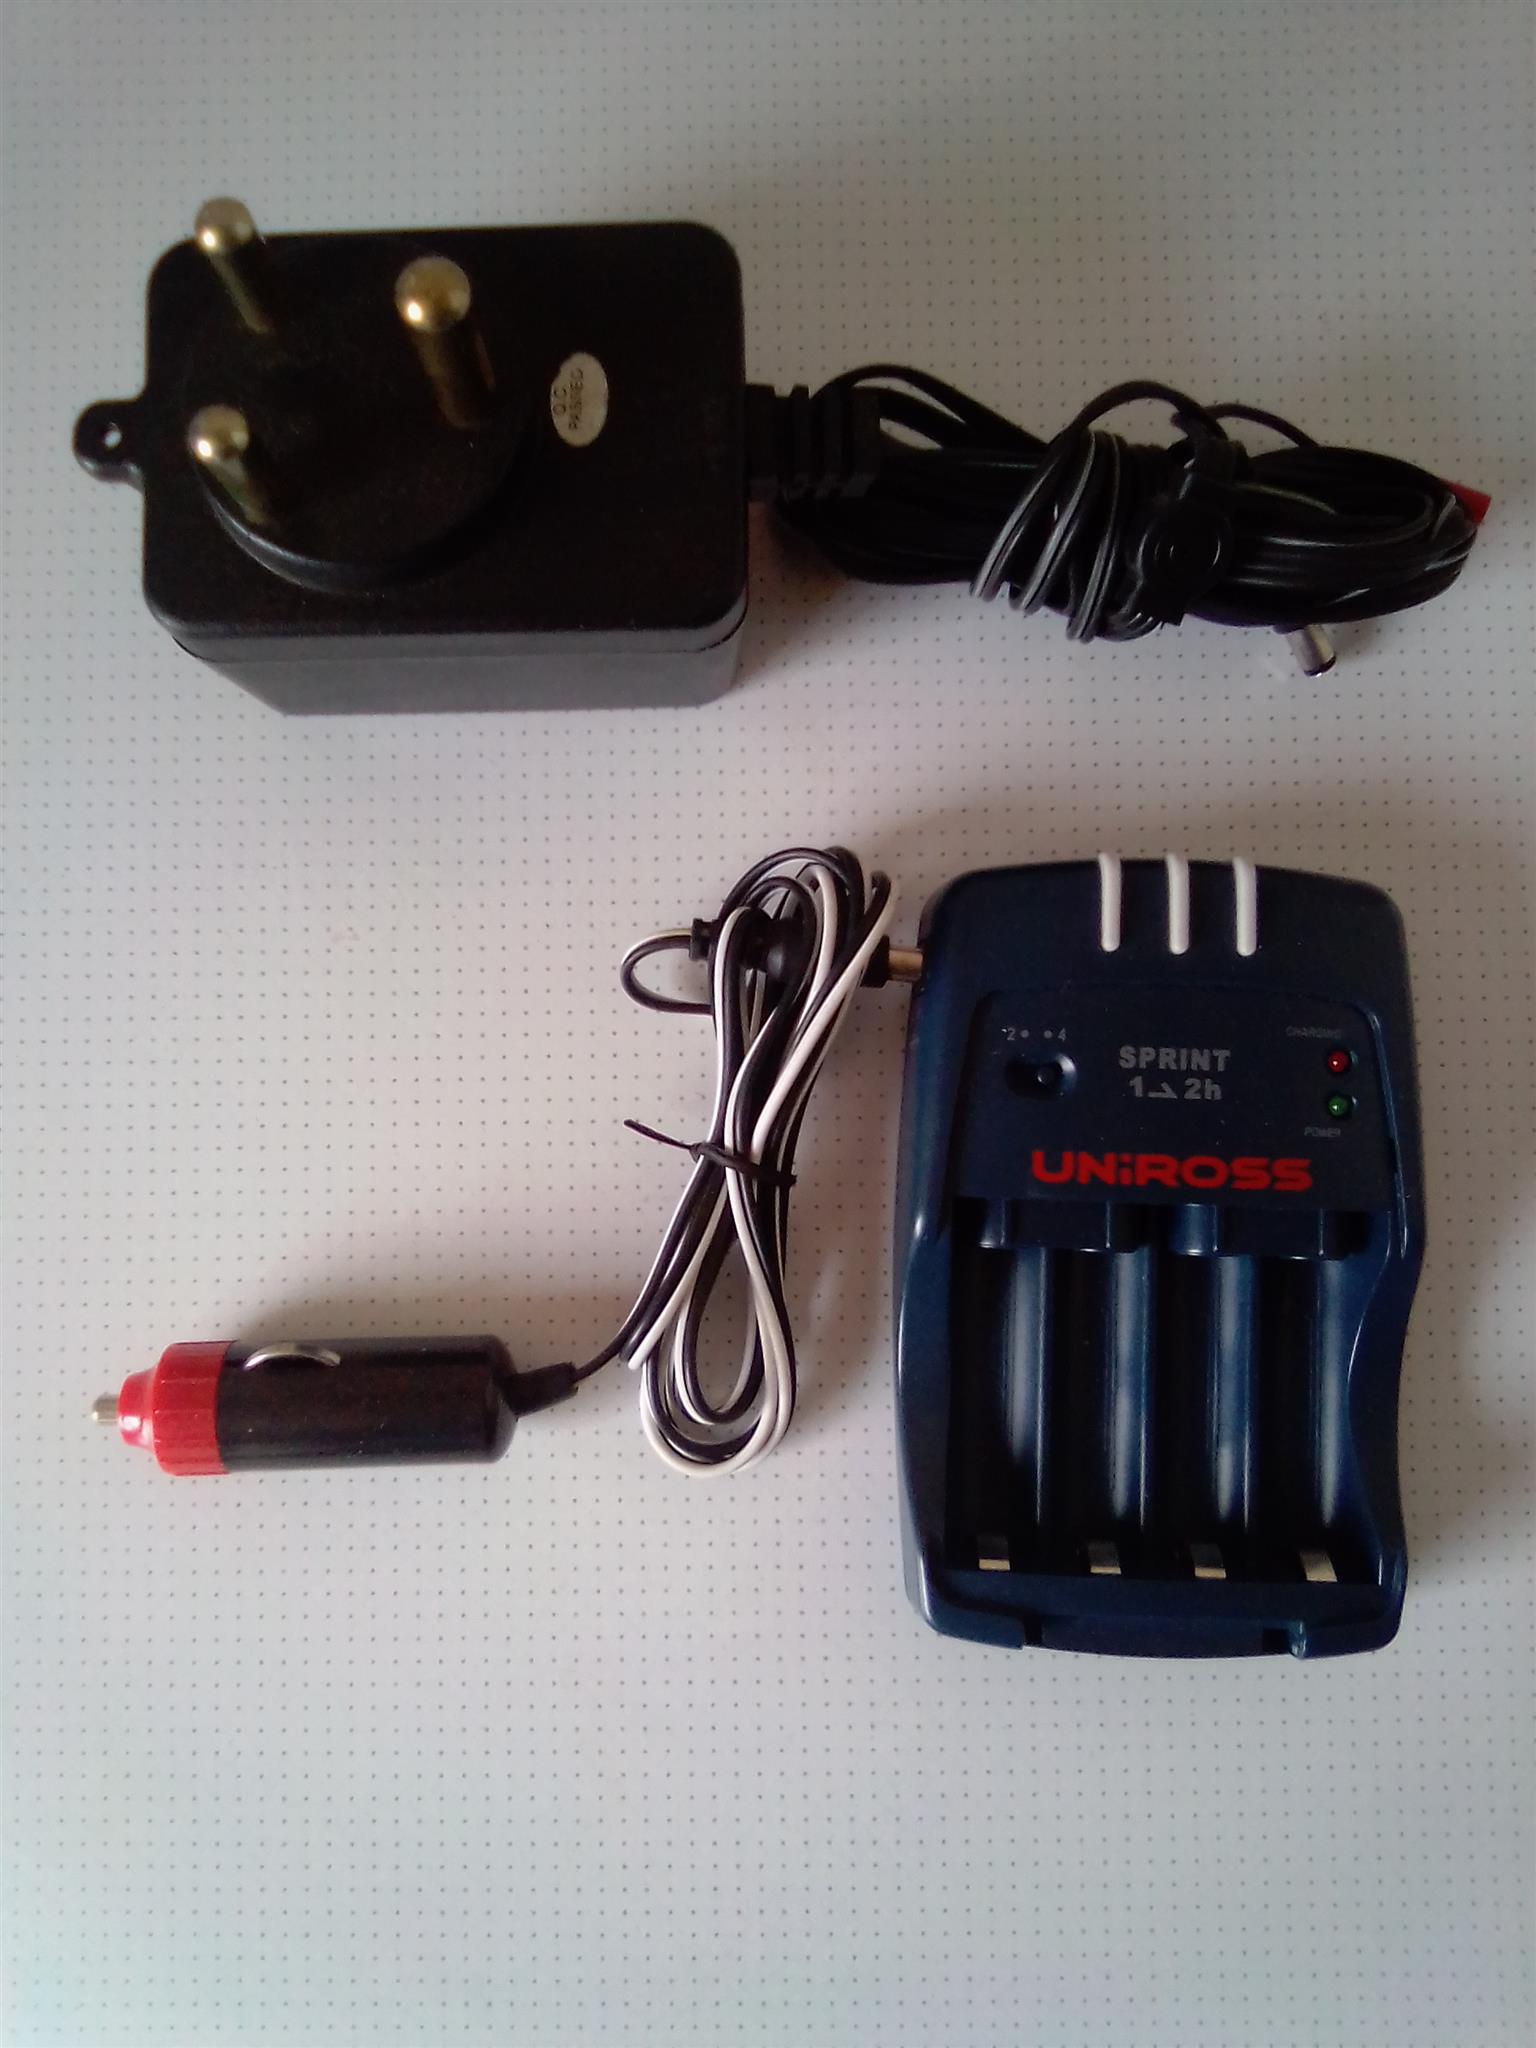 Charger for AA and AAA Batteries. Works on 220V and 12V.